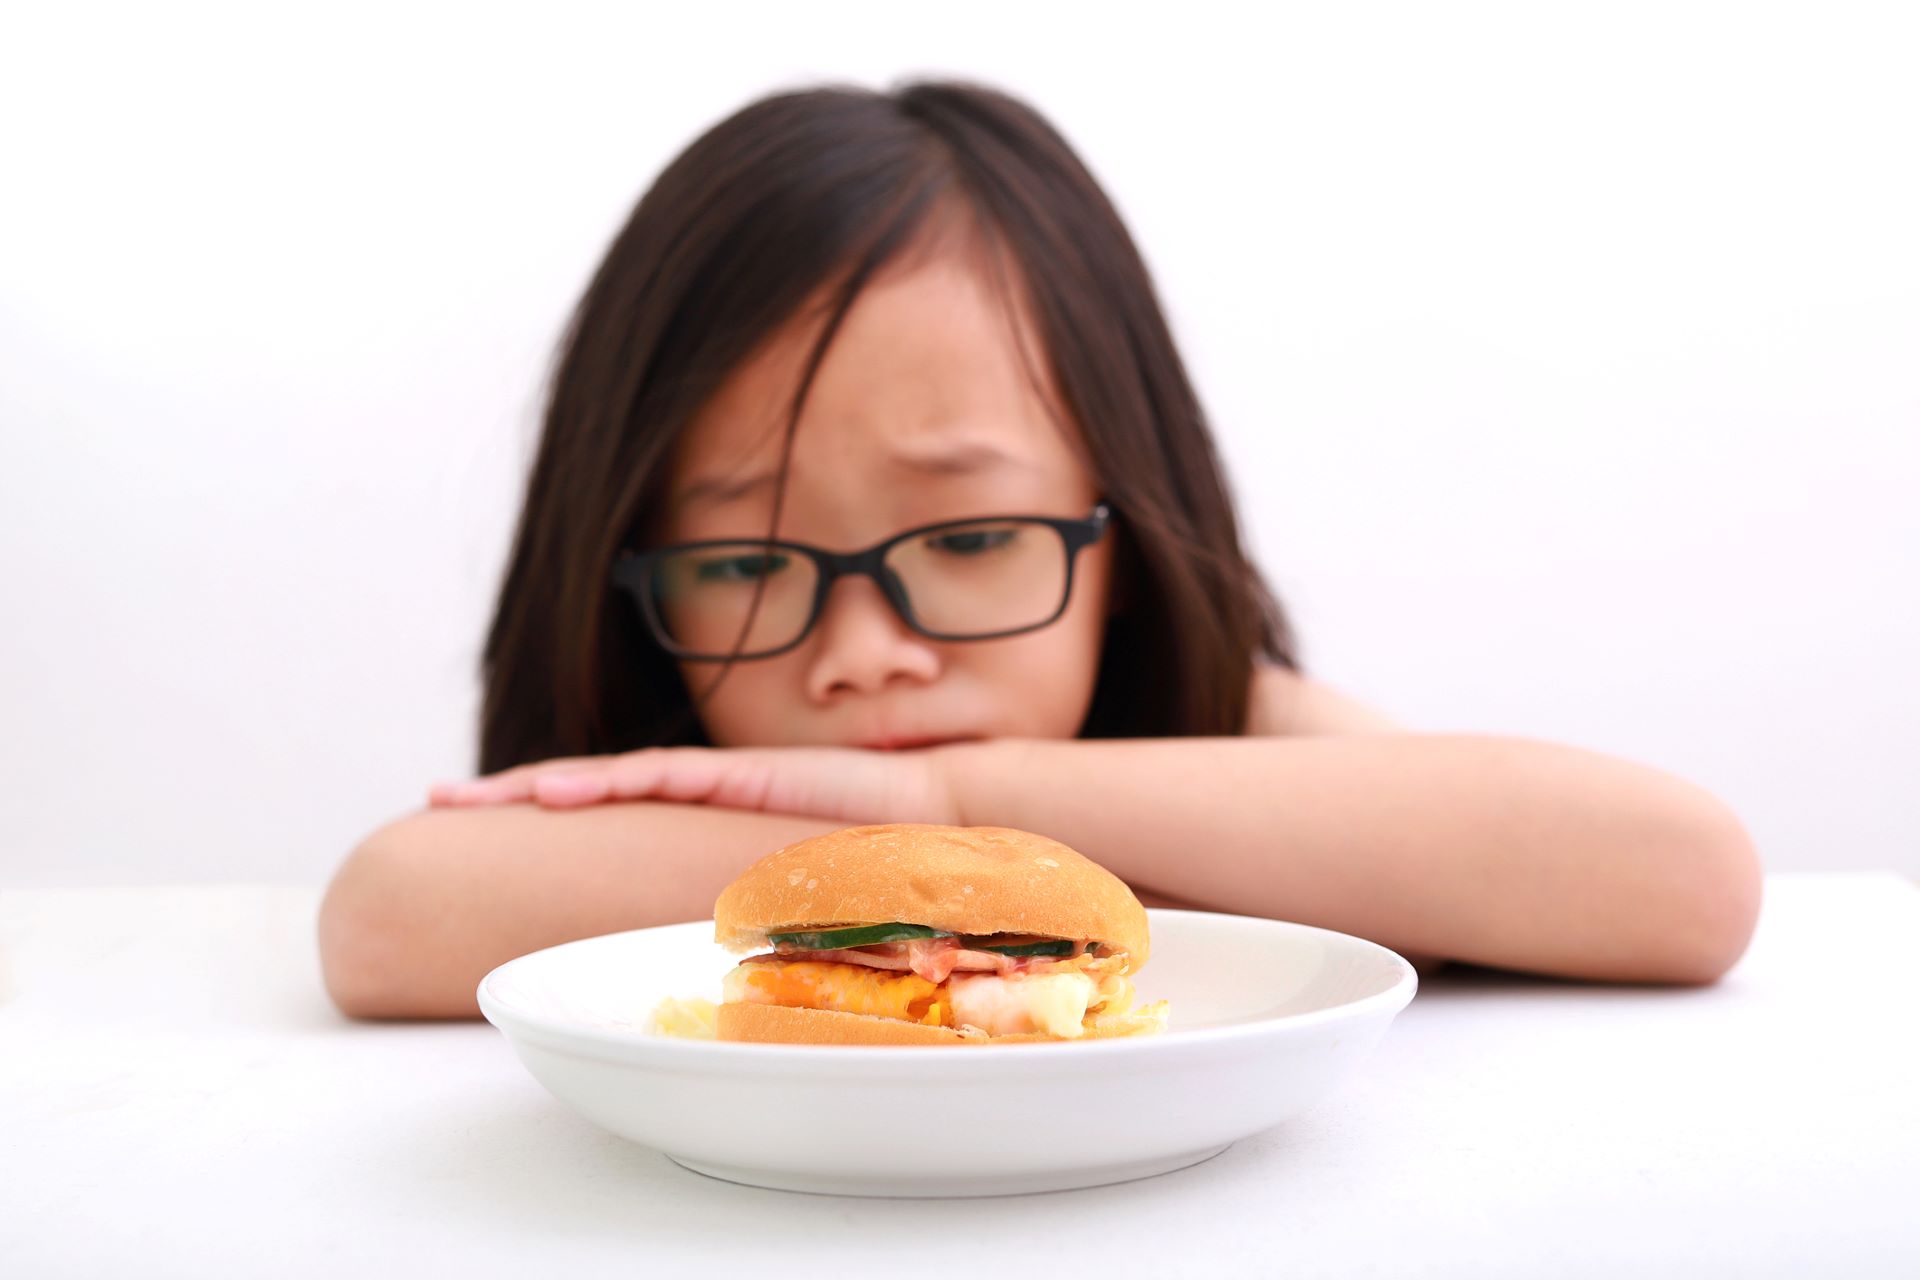 picky eating - child looking concerned over a dish